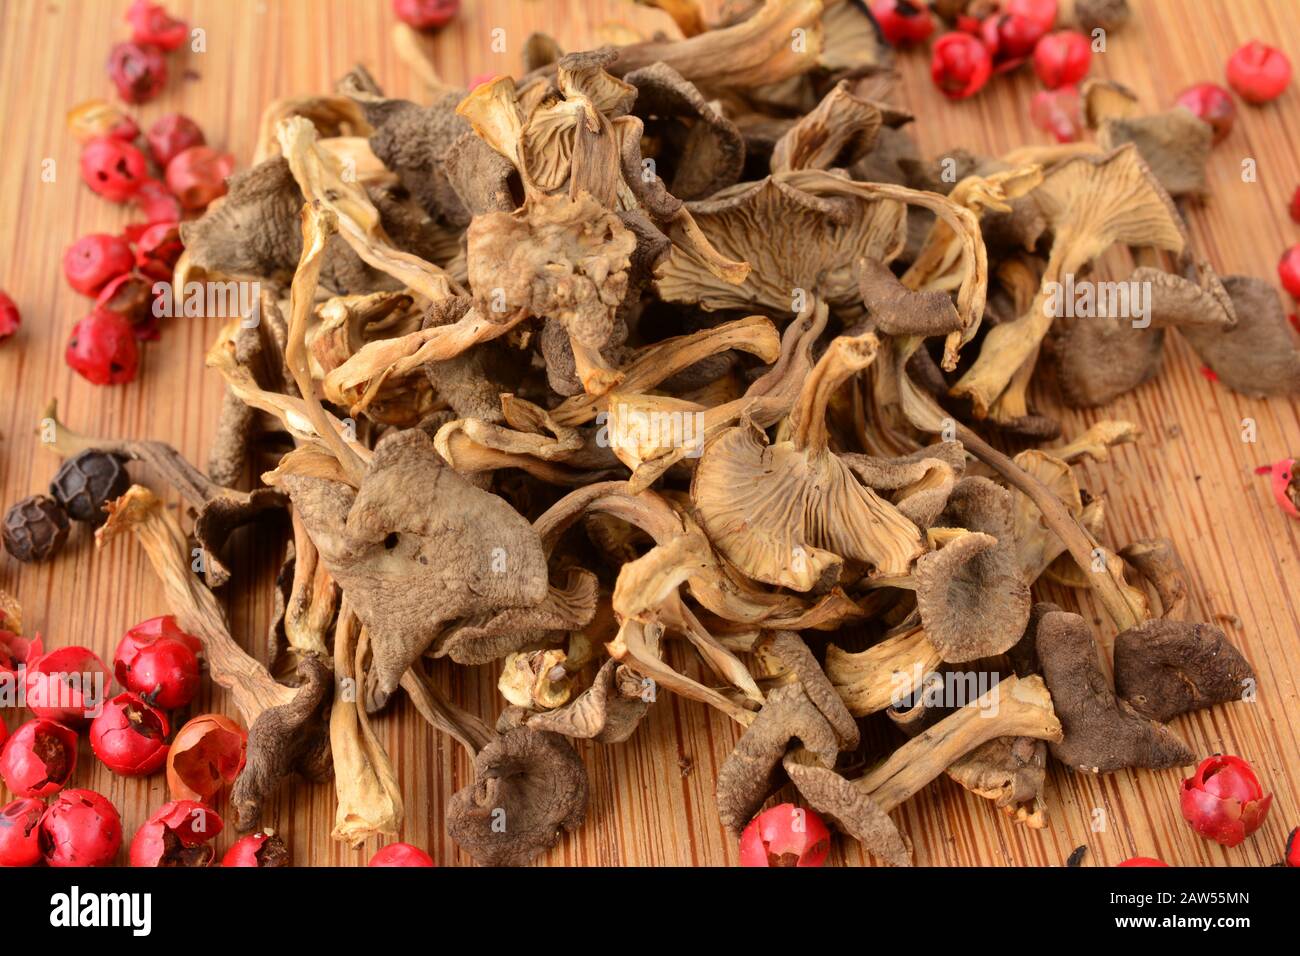 Dried Trumpet Chanterelle or Cantharellus tubaeformis ready for the kitchen, together with red and black pepper on wooden chopping board, close up vie Stock Photo